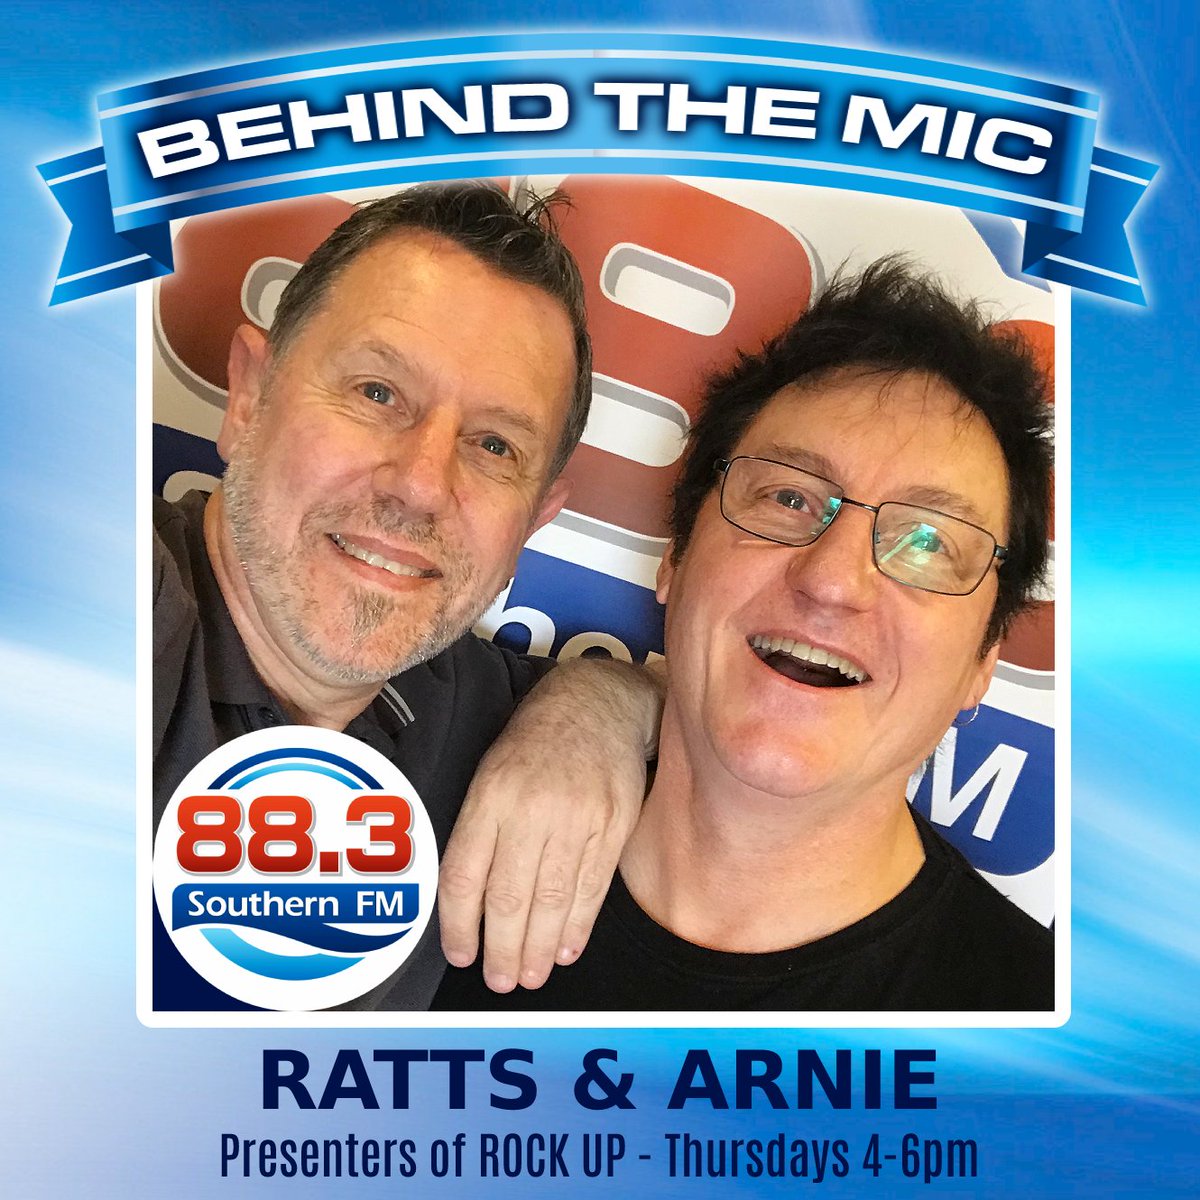 This week we introduce you to Ratts & Arnie, presenters of Rock Up, Thursdays from 4pm - 6pm. Tune in for your weekly fix of new songs by the legends of Aussie music! #southernfm #thesoundsofthebayside #bayside #thesoundsofthebayside #localandlive #behindthemic